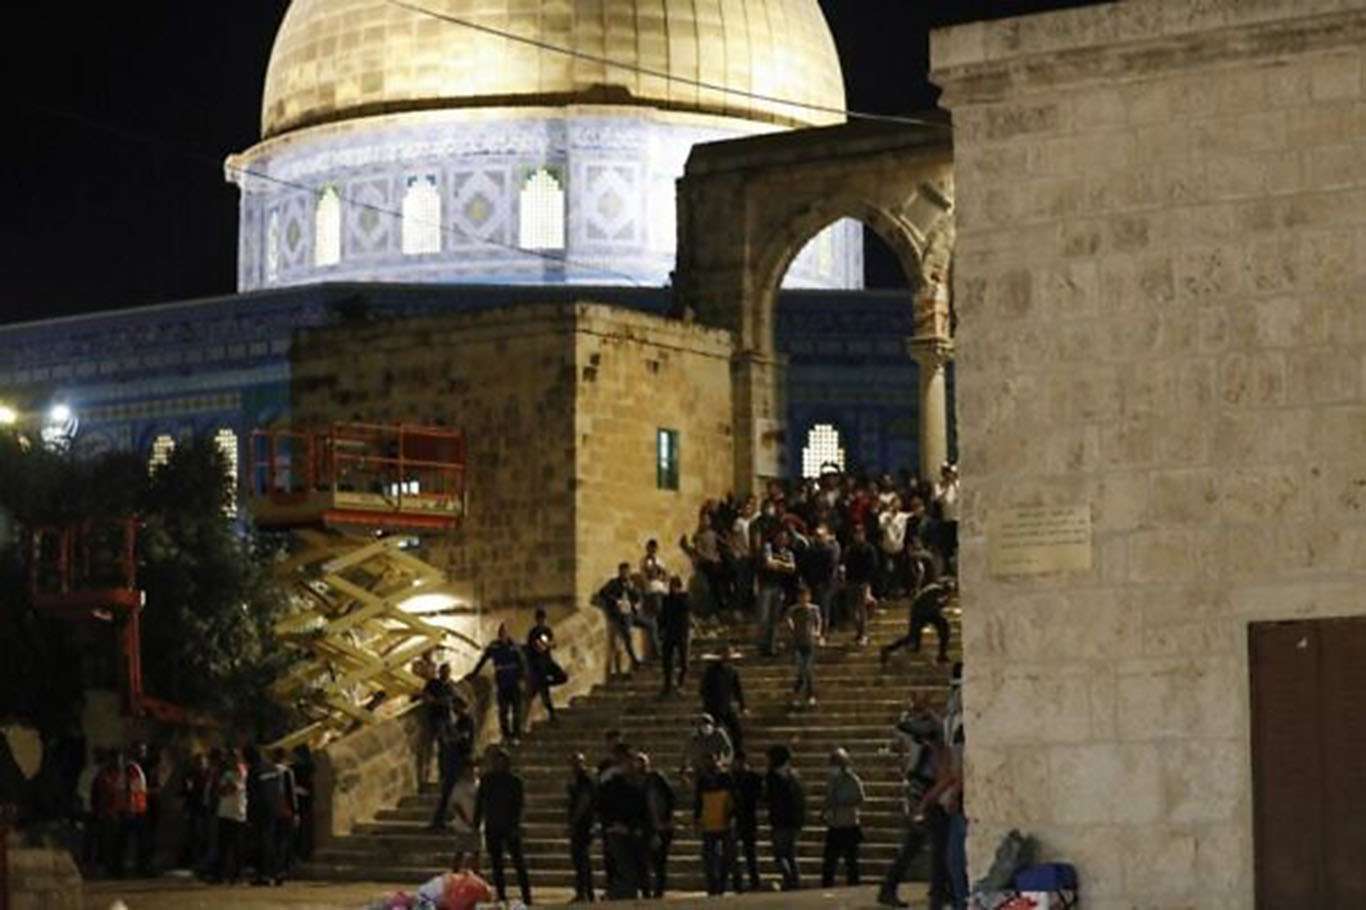 More than 160 Muslim worshippers injured in zionist regime’s attack on Al-Aqsa Mosque